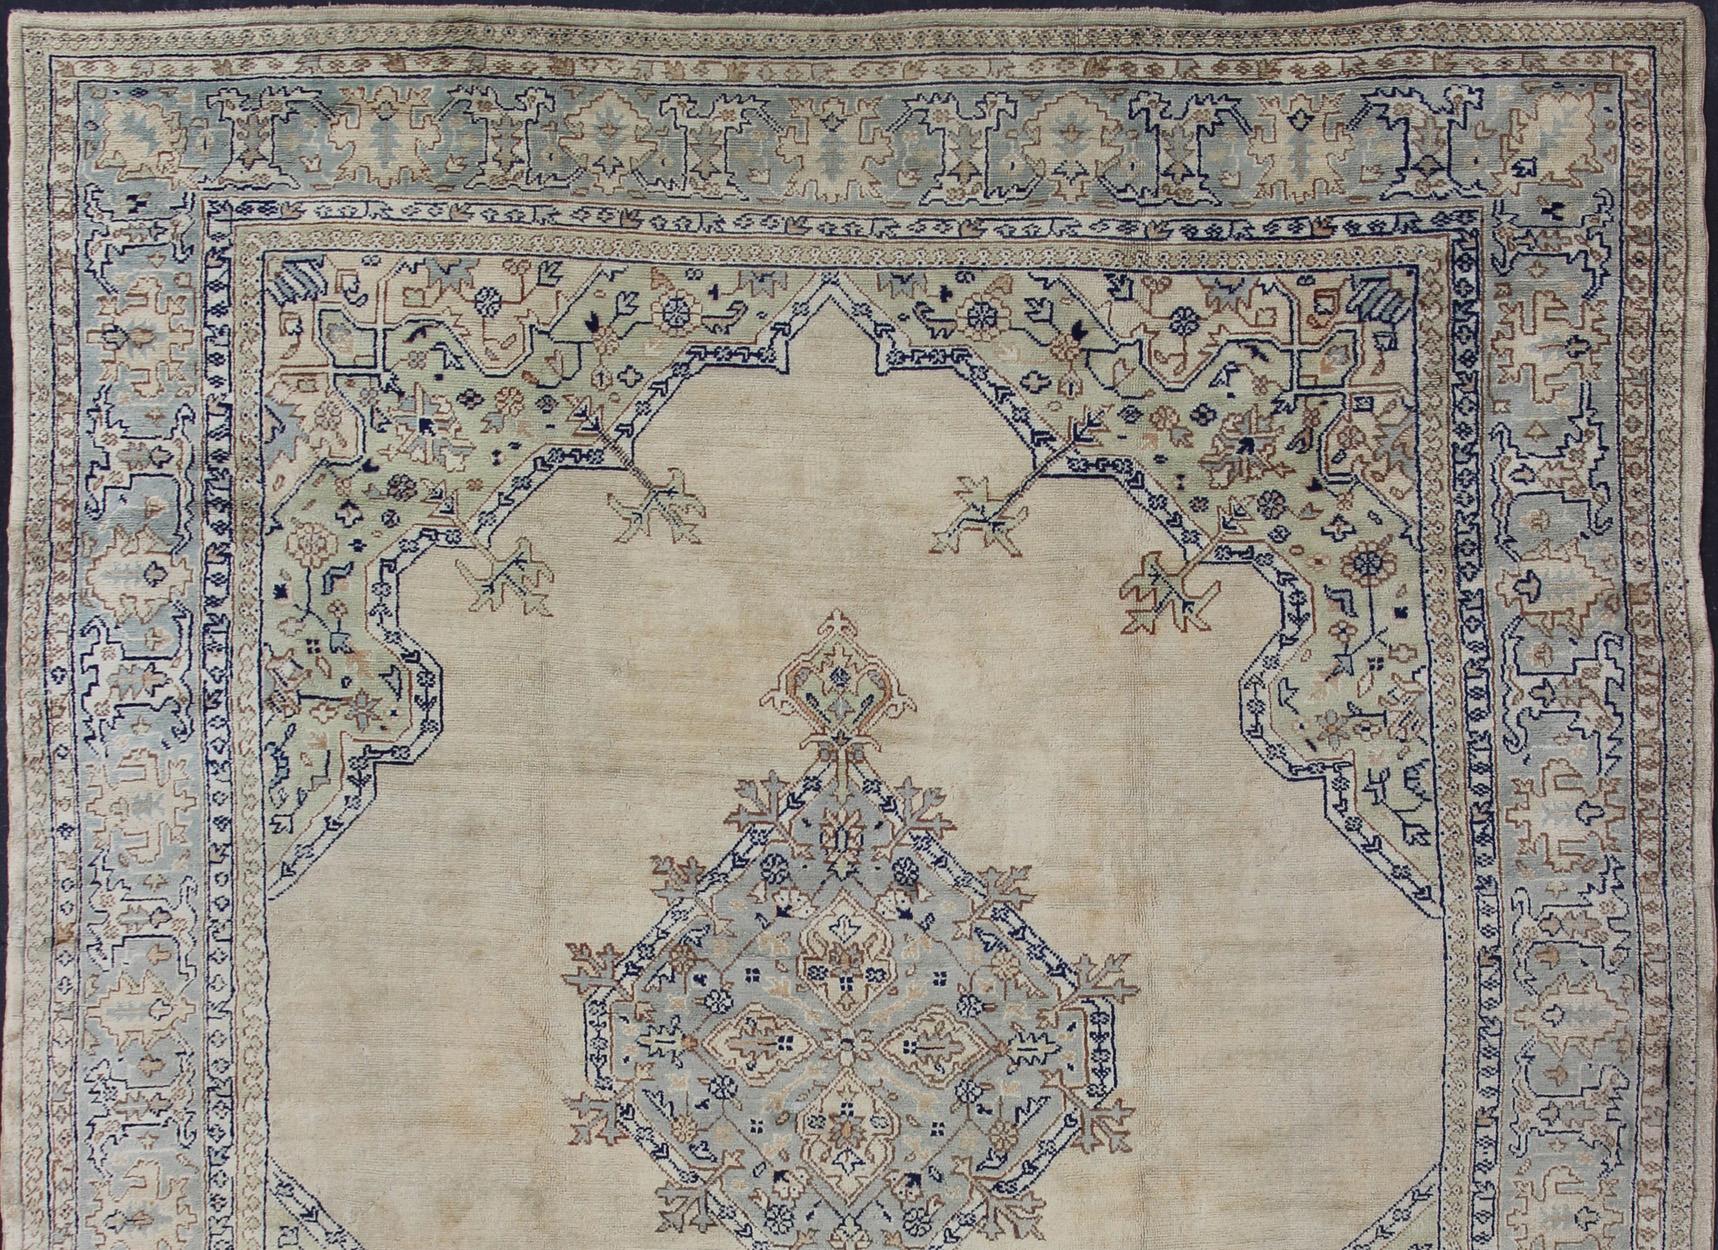 Antique Turkish Oushak with Geometric Motifs in Champagne Field and Accent Blue, Oushak antique rug from Turkey. Keivan Woven Arts / rug R20-0303, country of origin / type: Turkey / Oushak, circa 1920
Measures: 12'2 x 14'5 
This beautiful rug from